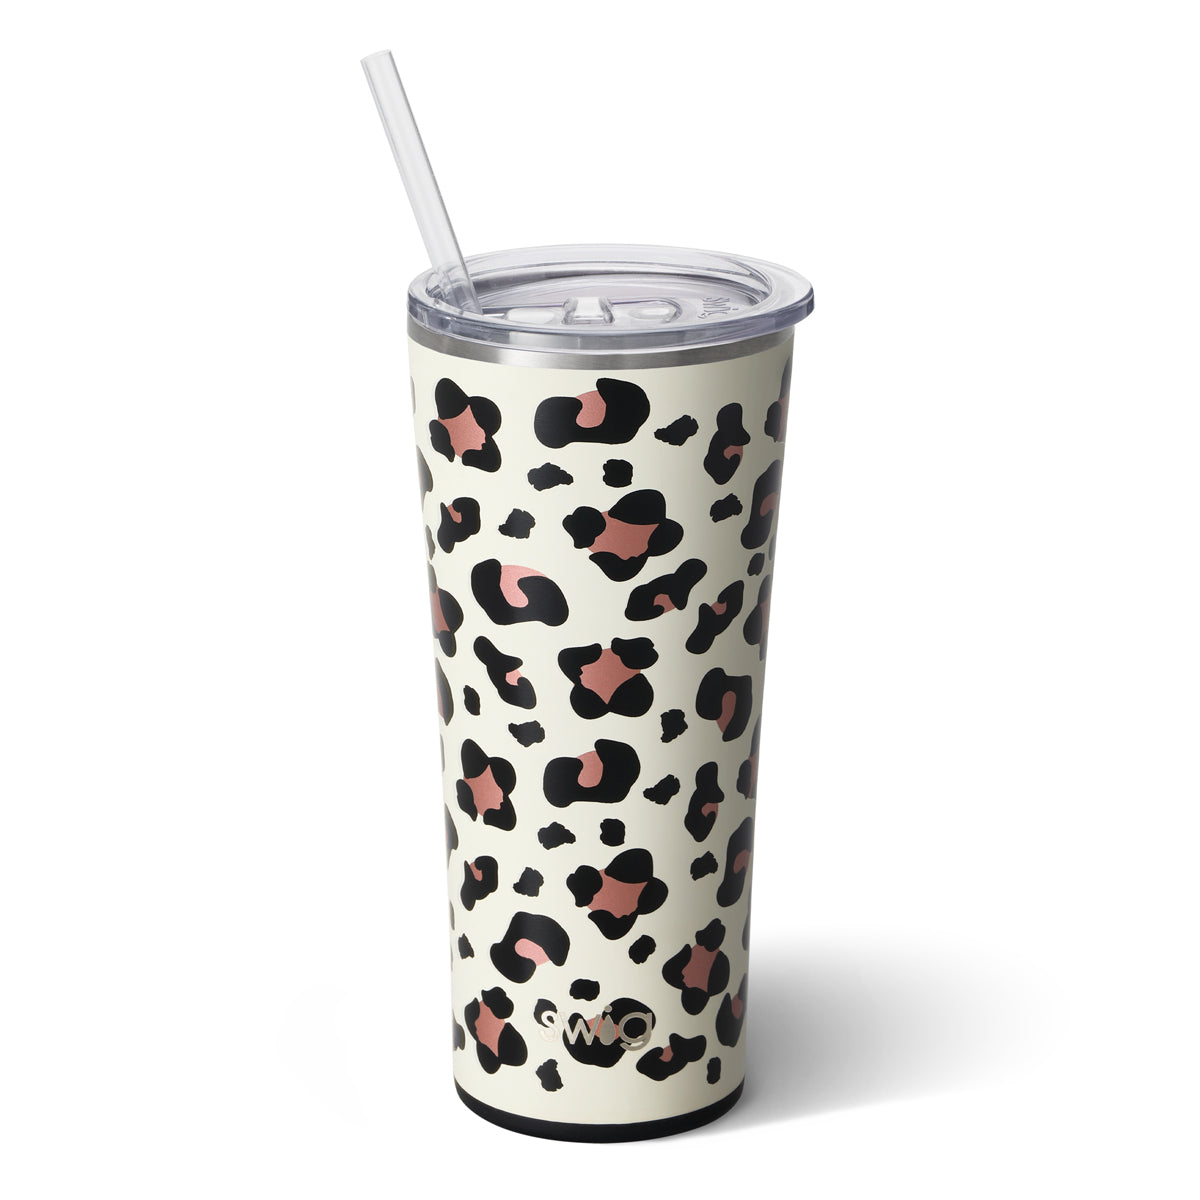 Swig, 32 oz. Stainless Steel Tumbler Hayride – Deb & Co. Boutique